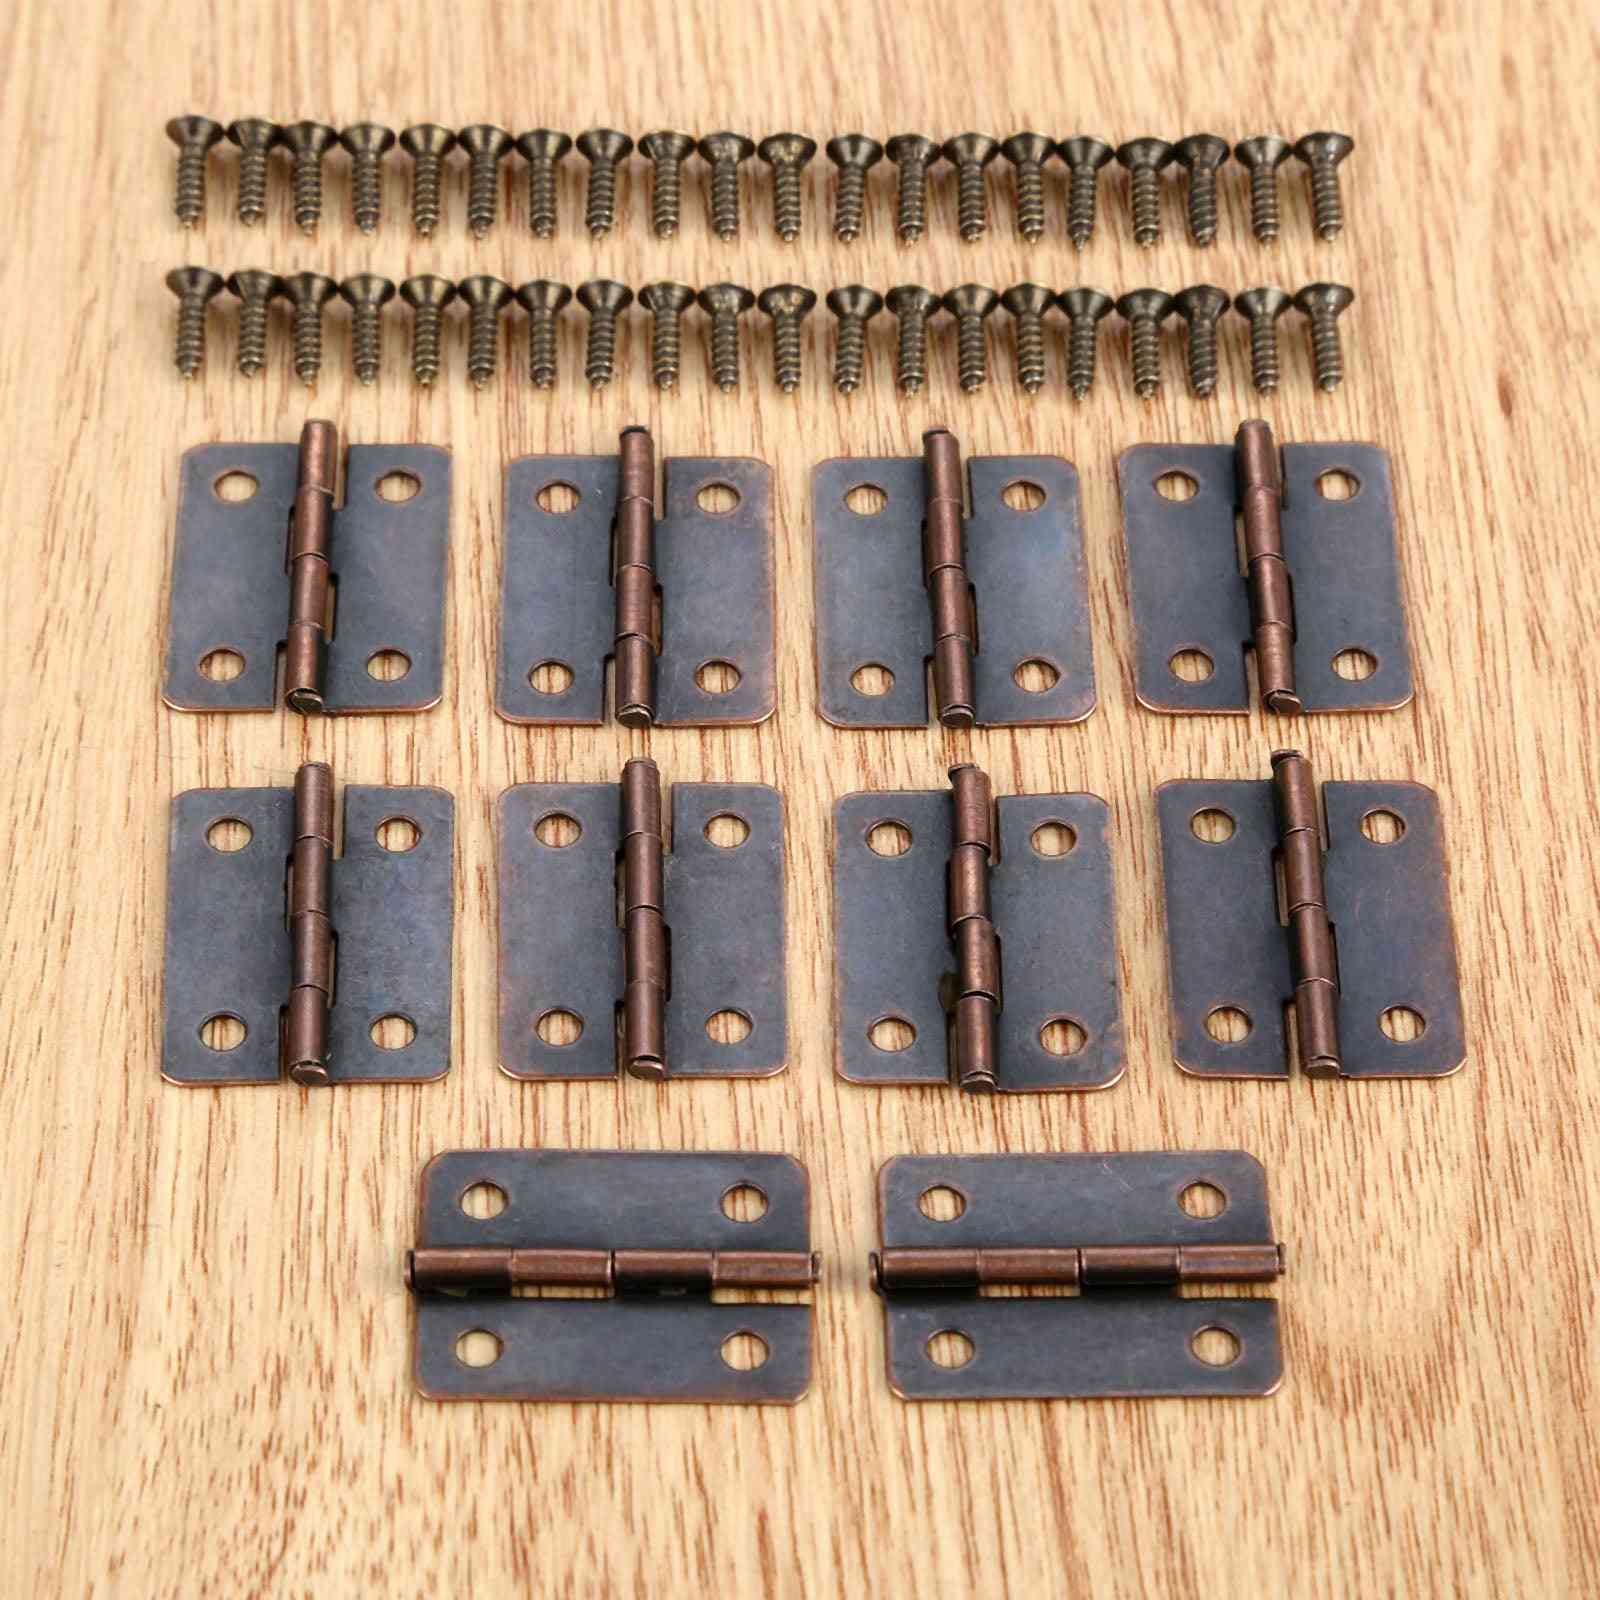 10pcs  Of Antique Hinges With Screw For Vintage Wooden Box/door/cabinet/suitcase/wardrobe